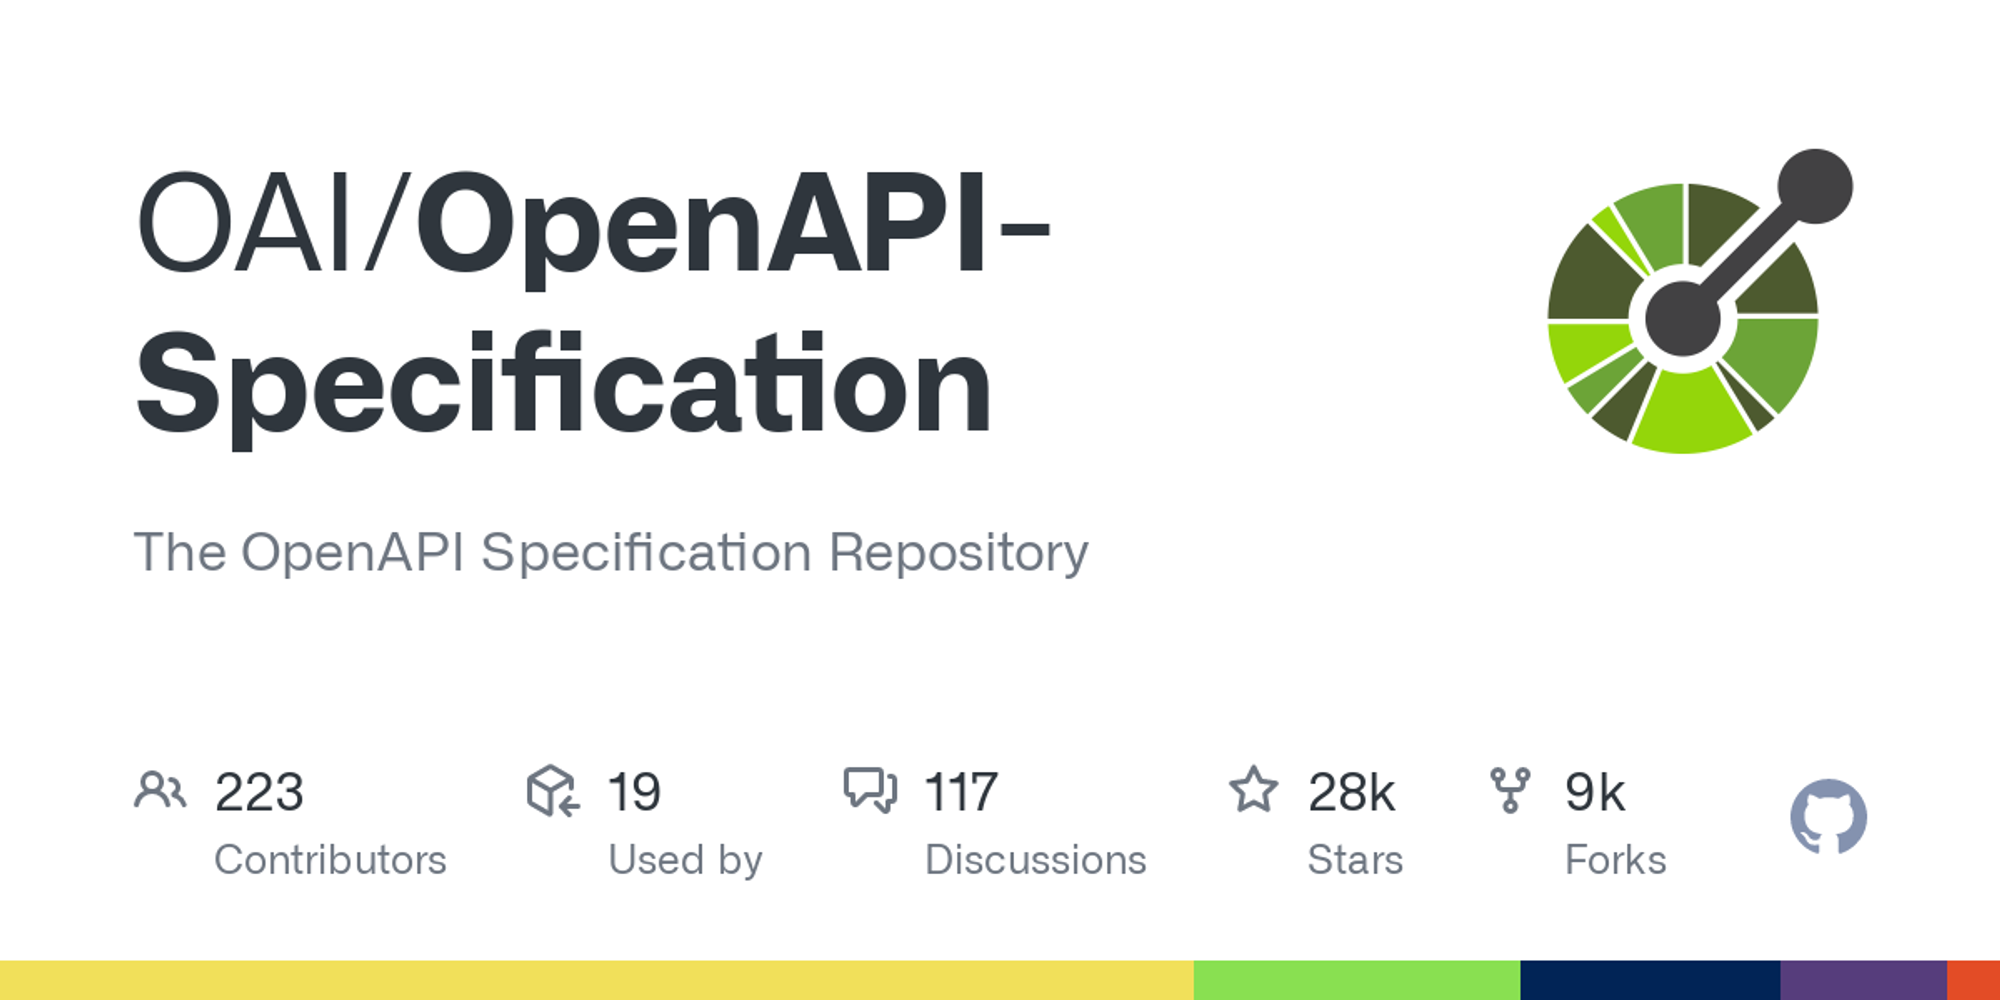 OpenAPI-Specification/3.1.0.md at main · OAI/OpenAPI-Specification